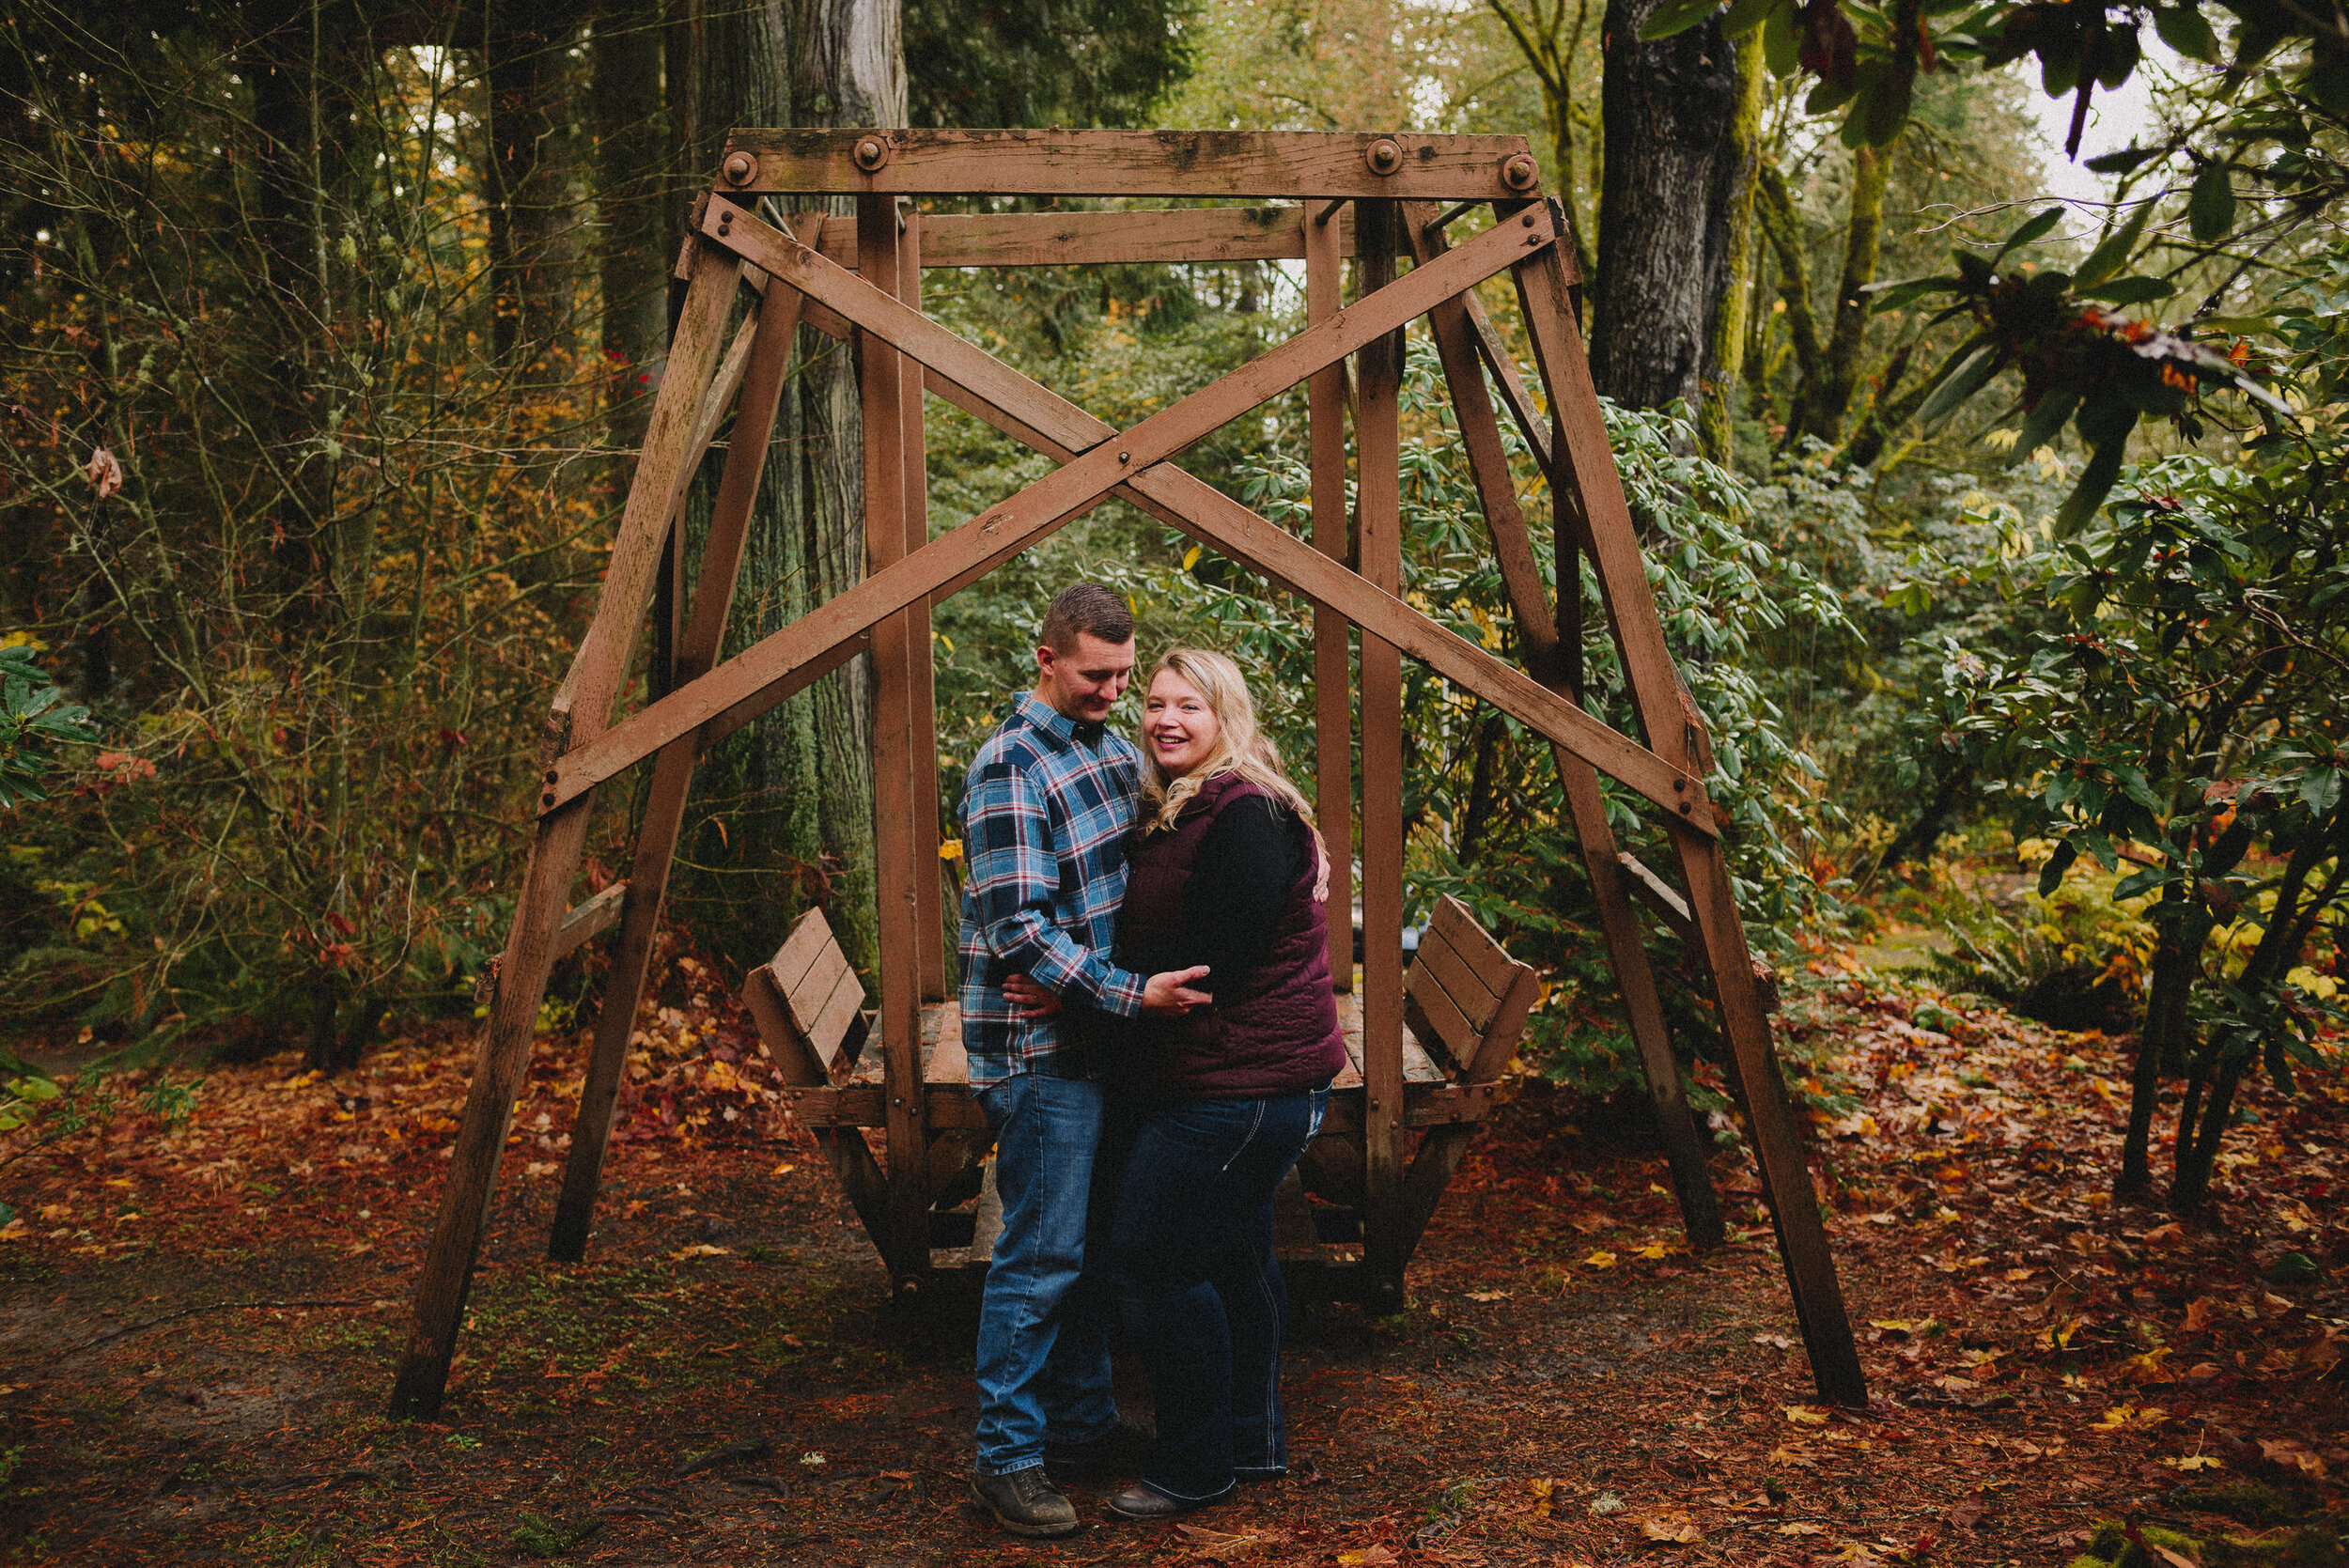 priest-point-park-couples-session-olympia-washington-way-up-north-photography (200).jpg